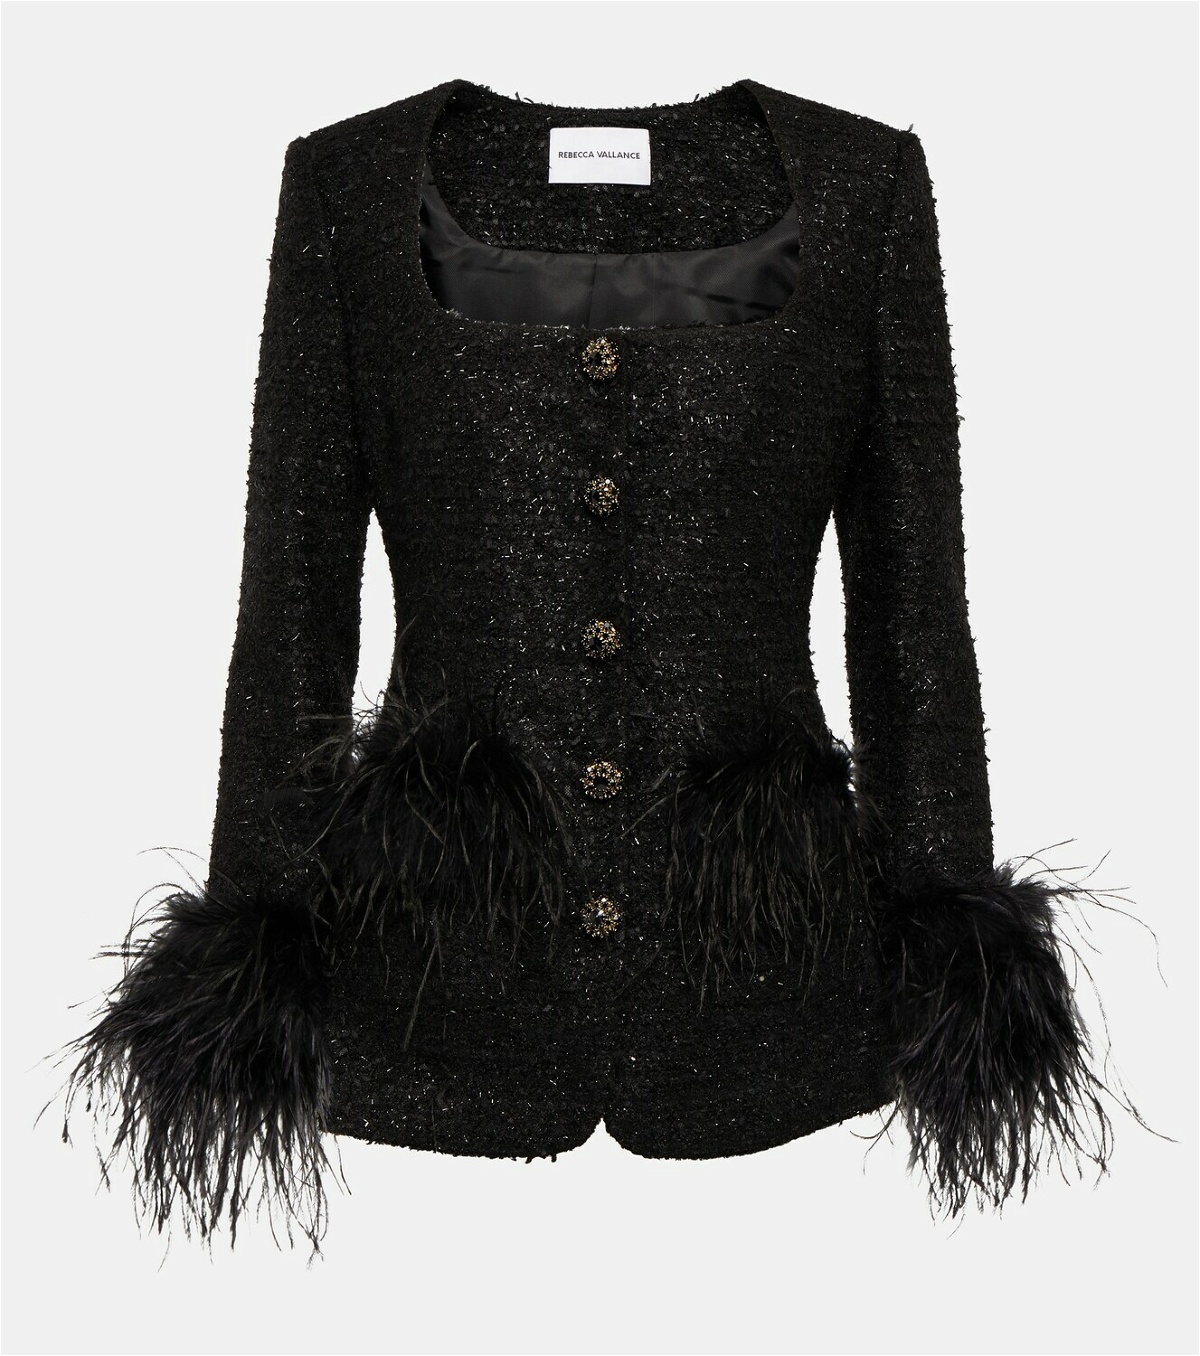 Rebecca Vallance - Raine Crystal-embellished Knitted Jacket - Black - Small - Net A Porter